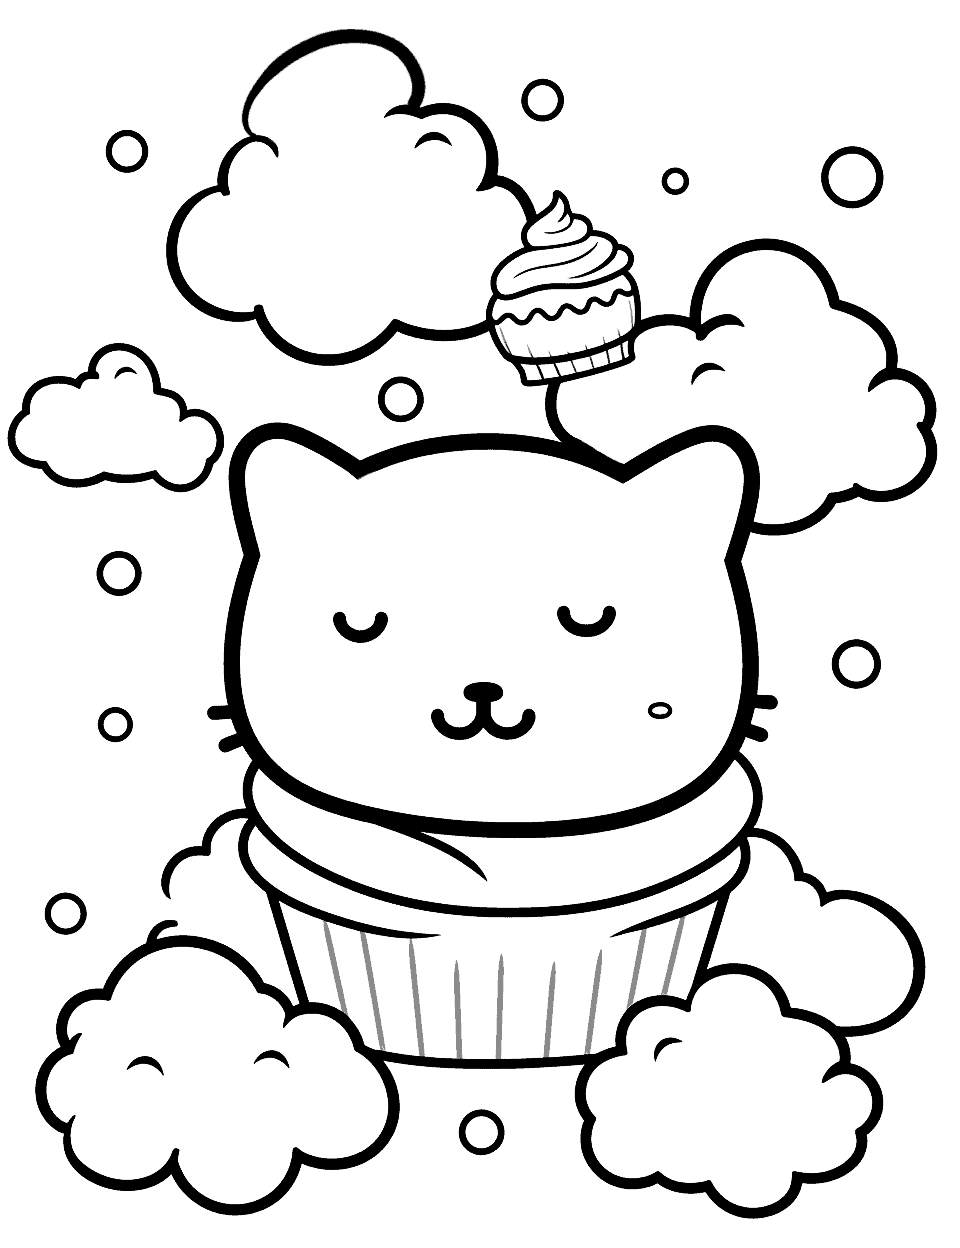 Kitty's Dessert Dream Kawaii Coloring Page - A Kawaii kitty dreaming about a sky filled with a flying cupcake.